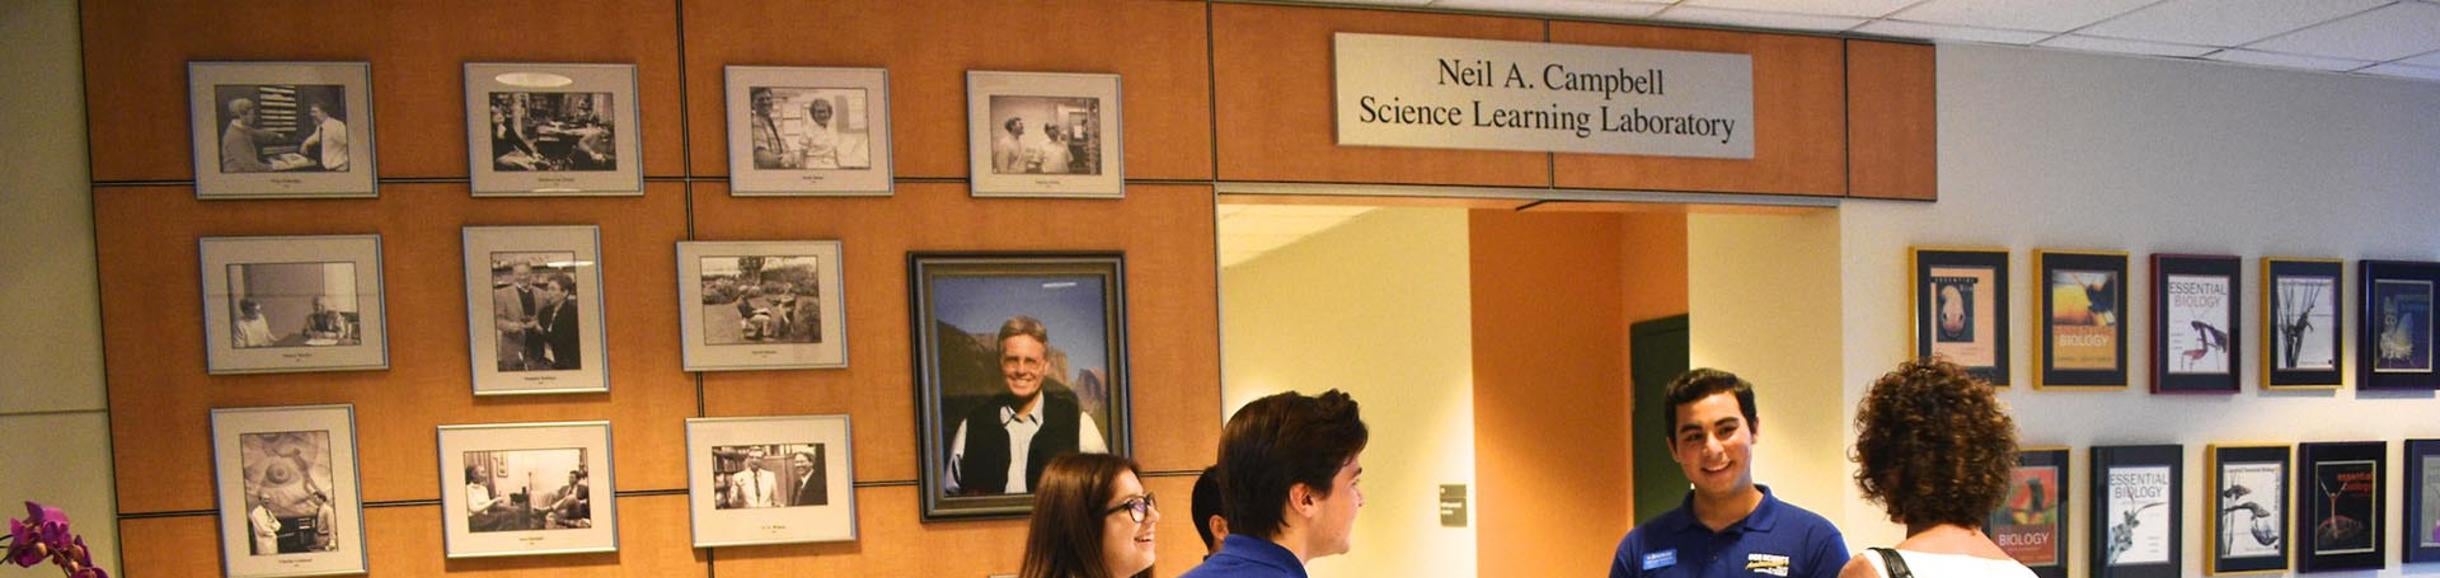 Neil A. Campbell Science Learning Laboratory at UCR